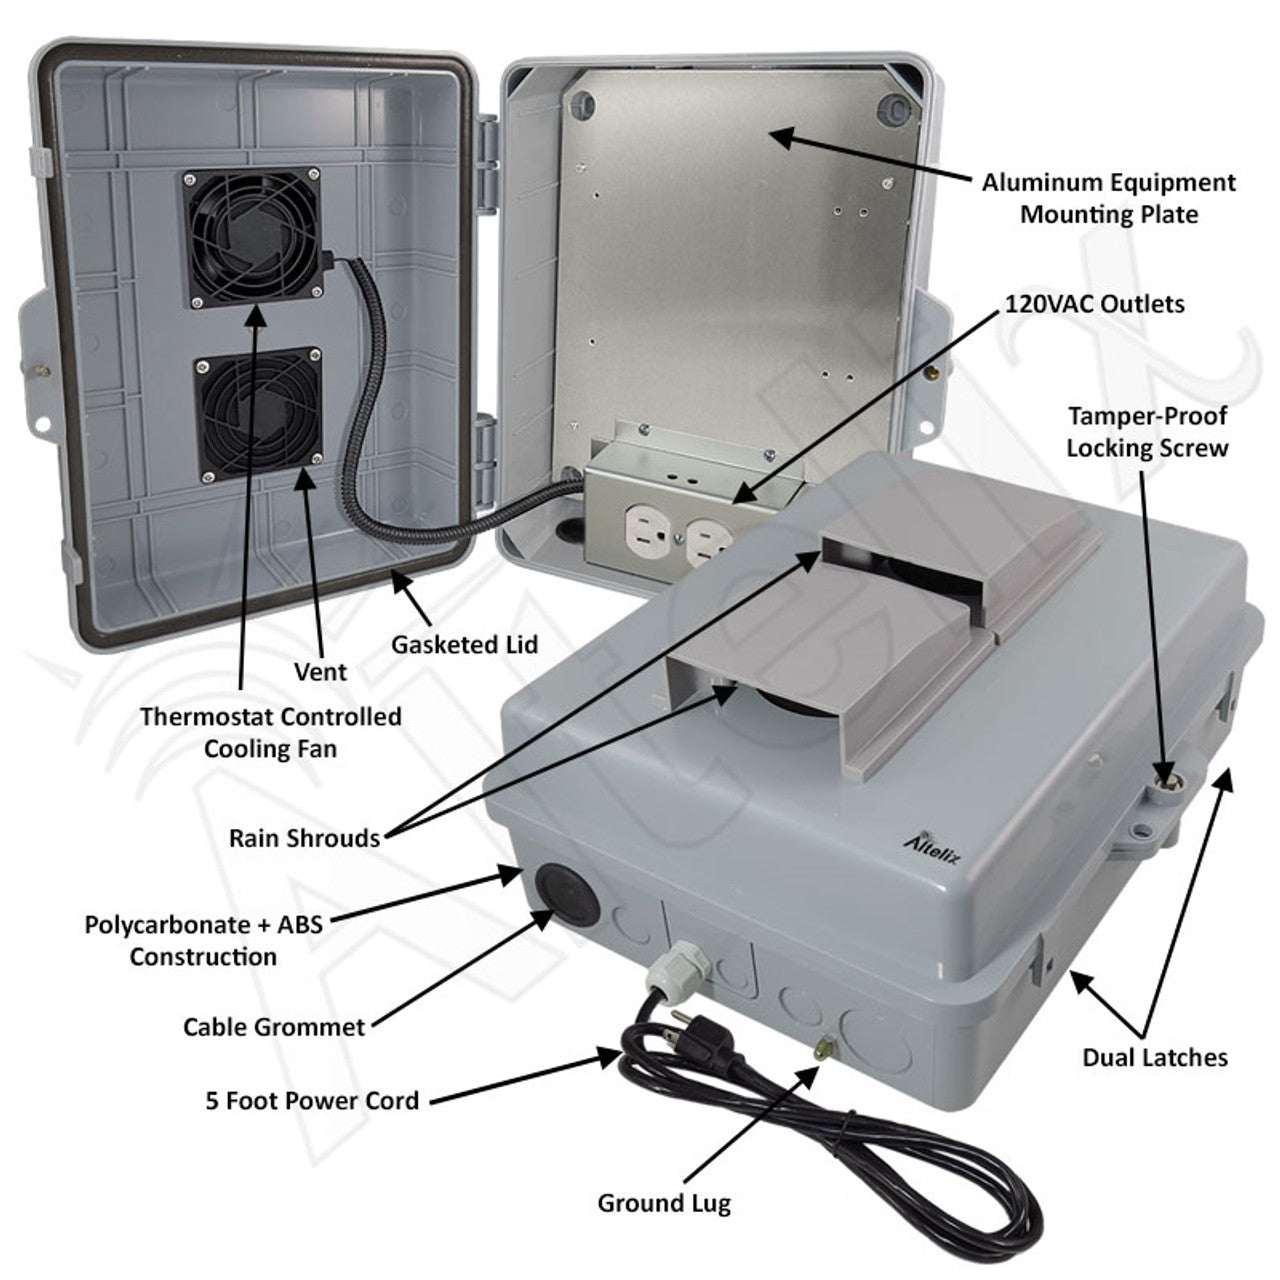 Altelix 14x11x5 Vented Polycarbonate + ABS Weatherproof NEMA Enclosure with Cooling Fan, 120 VAC Outlets & Power Cord